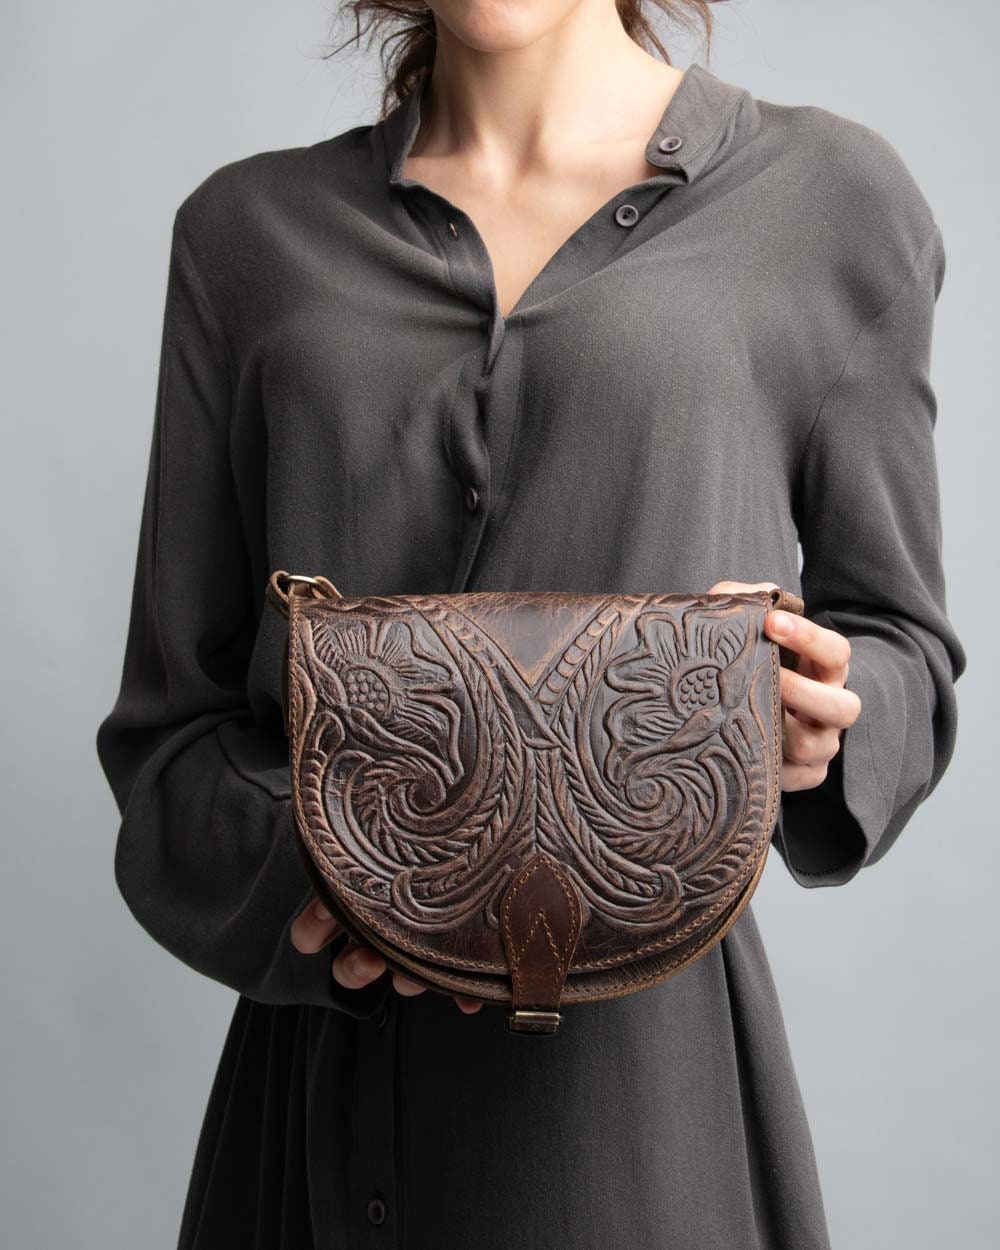 Vintage tooled leather purse, Brown tooled leather purse for women, Crossbody leather bag, Hand tooled leather purse